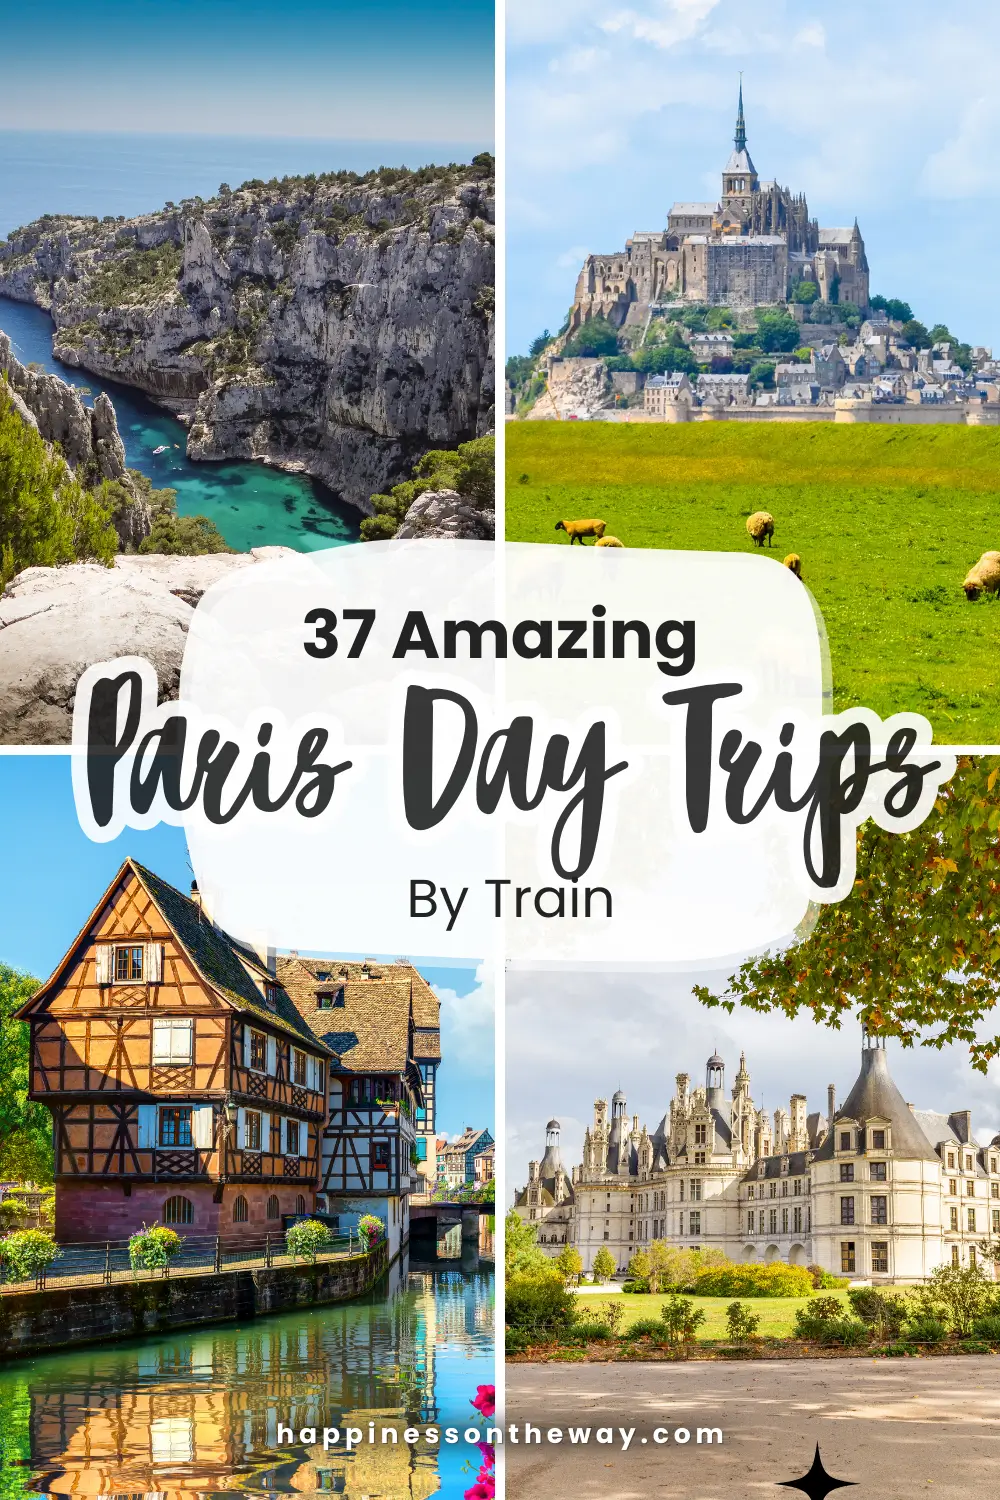 The 37 Amazing Paris Day Trips by Train featuring iconic destinations. The top left shows a serene sea cliff cove of Marseille, top-right depicts the historic Mont Saint-Michel, bottom-left highlights a traditional Alsatian half-timbered house by a canal in Strasbourg, and bottom-right captures the majestic Château de Chambord.